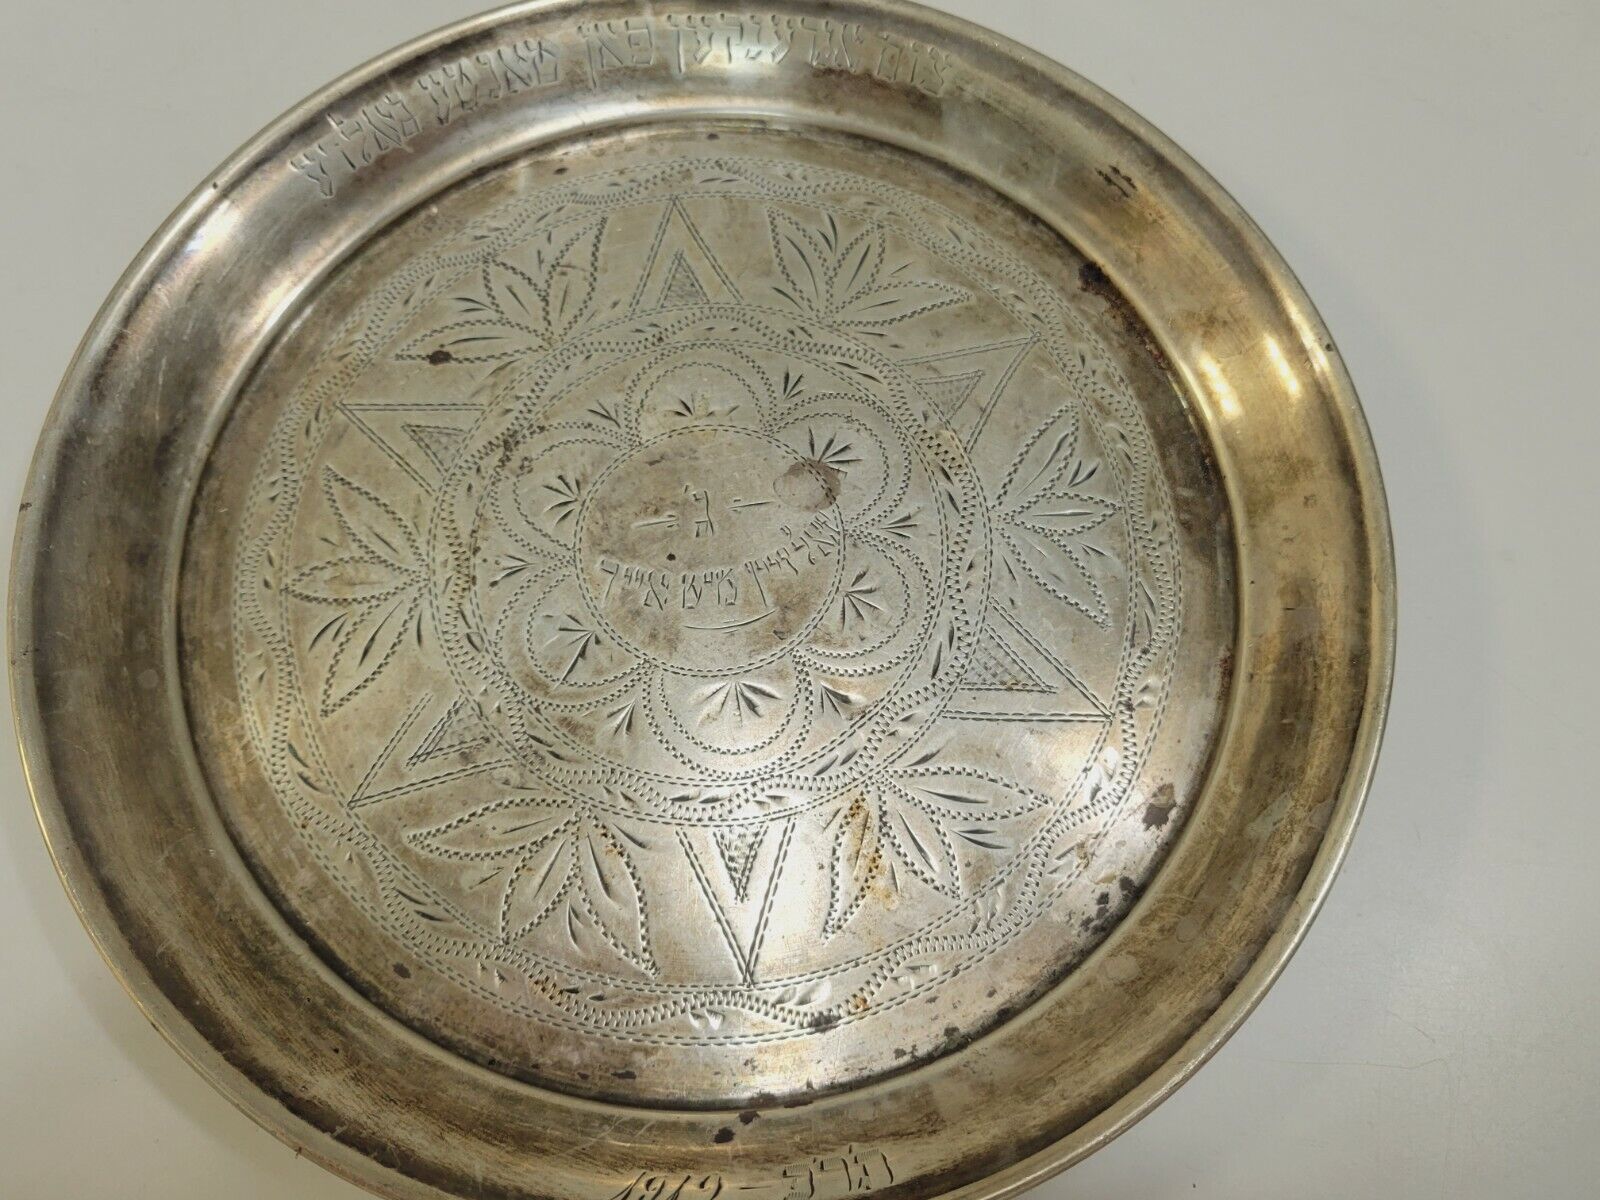 JUDAICA STERLING SILVER ROUND TRAY INTERESTING ENGRAVING  1919